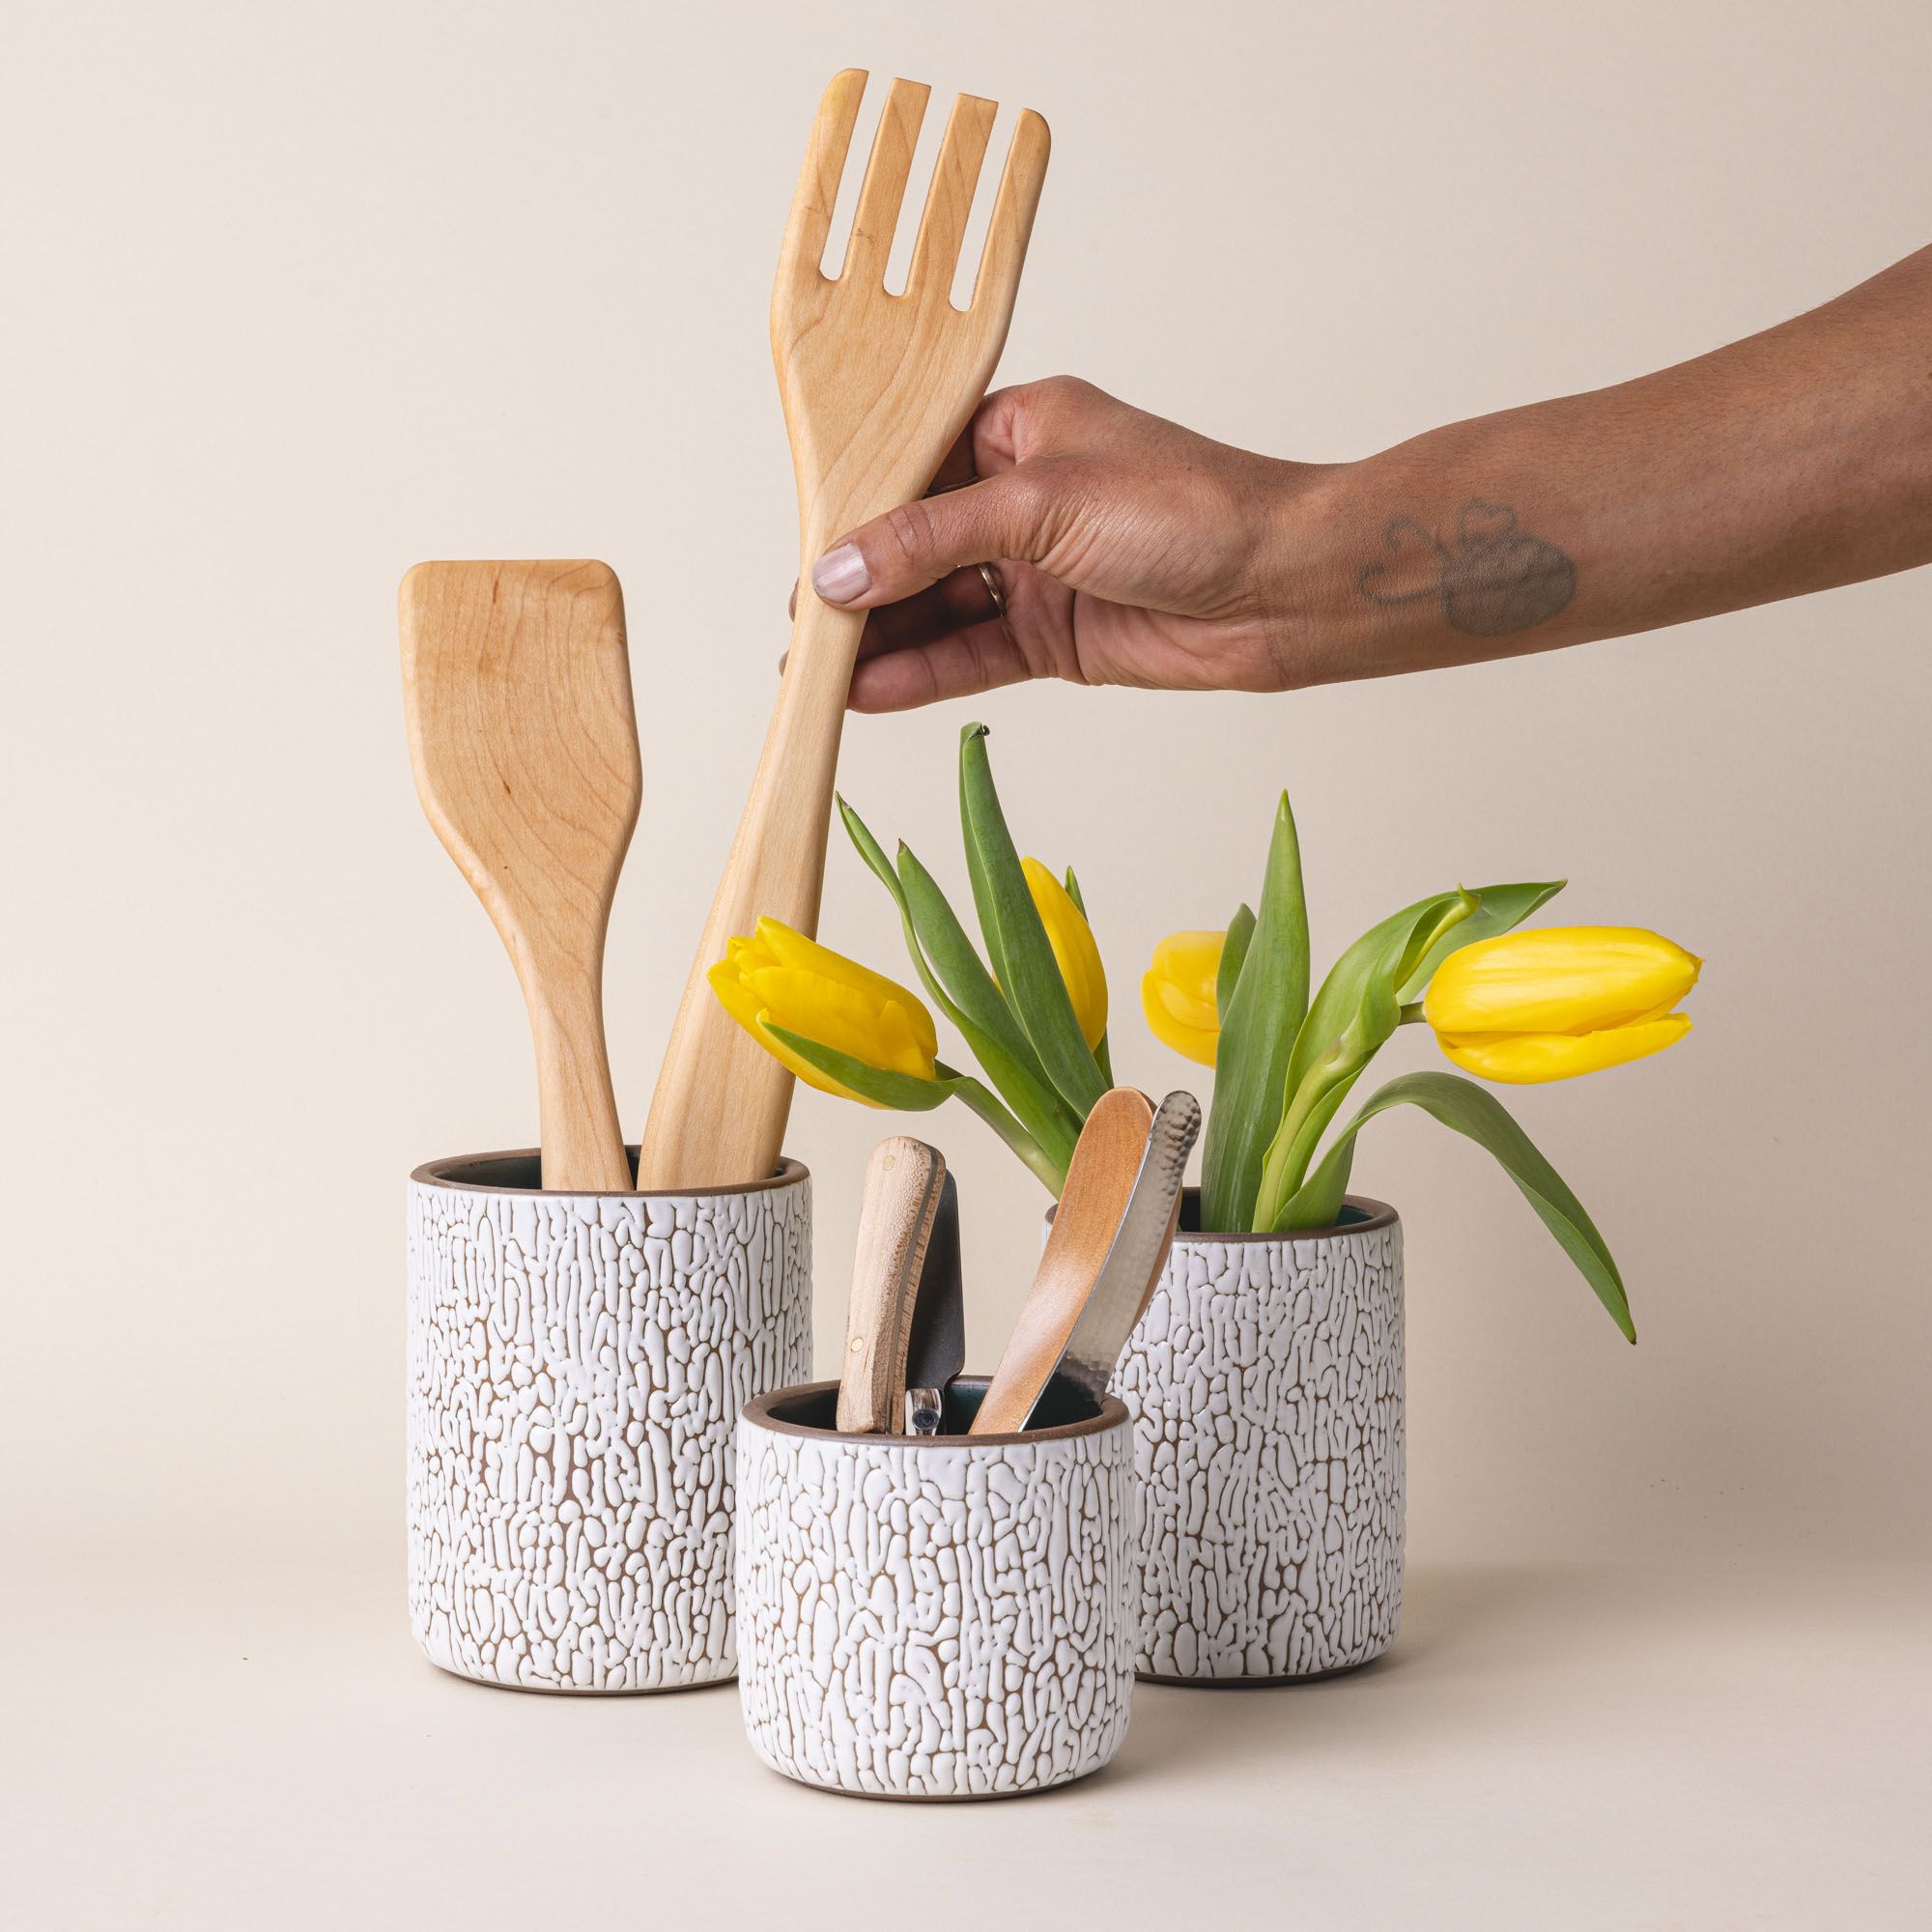 Three white ceramic vessels in Small, Medium, and Big with cracked texture and the interior being dark teal. Each vessel is filled with wooden utensils, flowers, flatware.